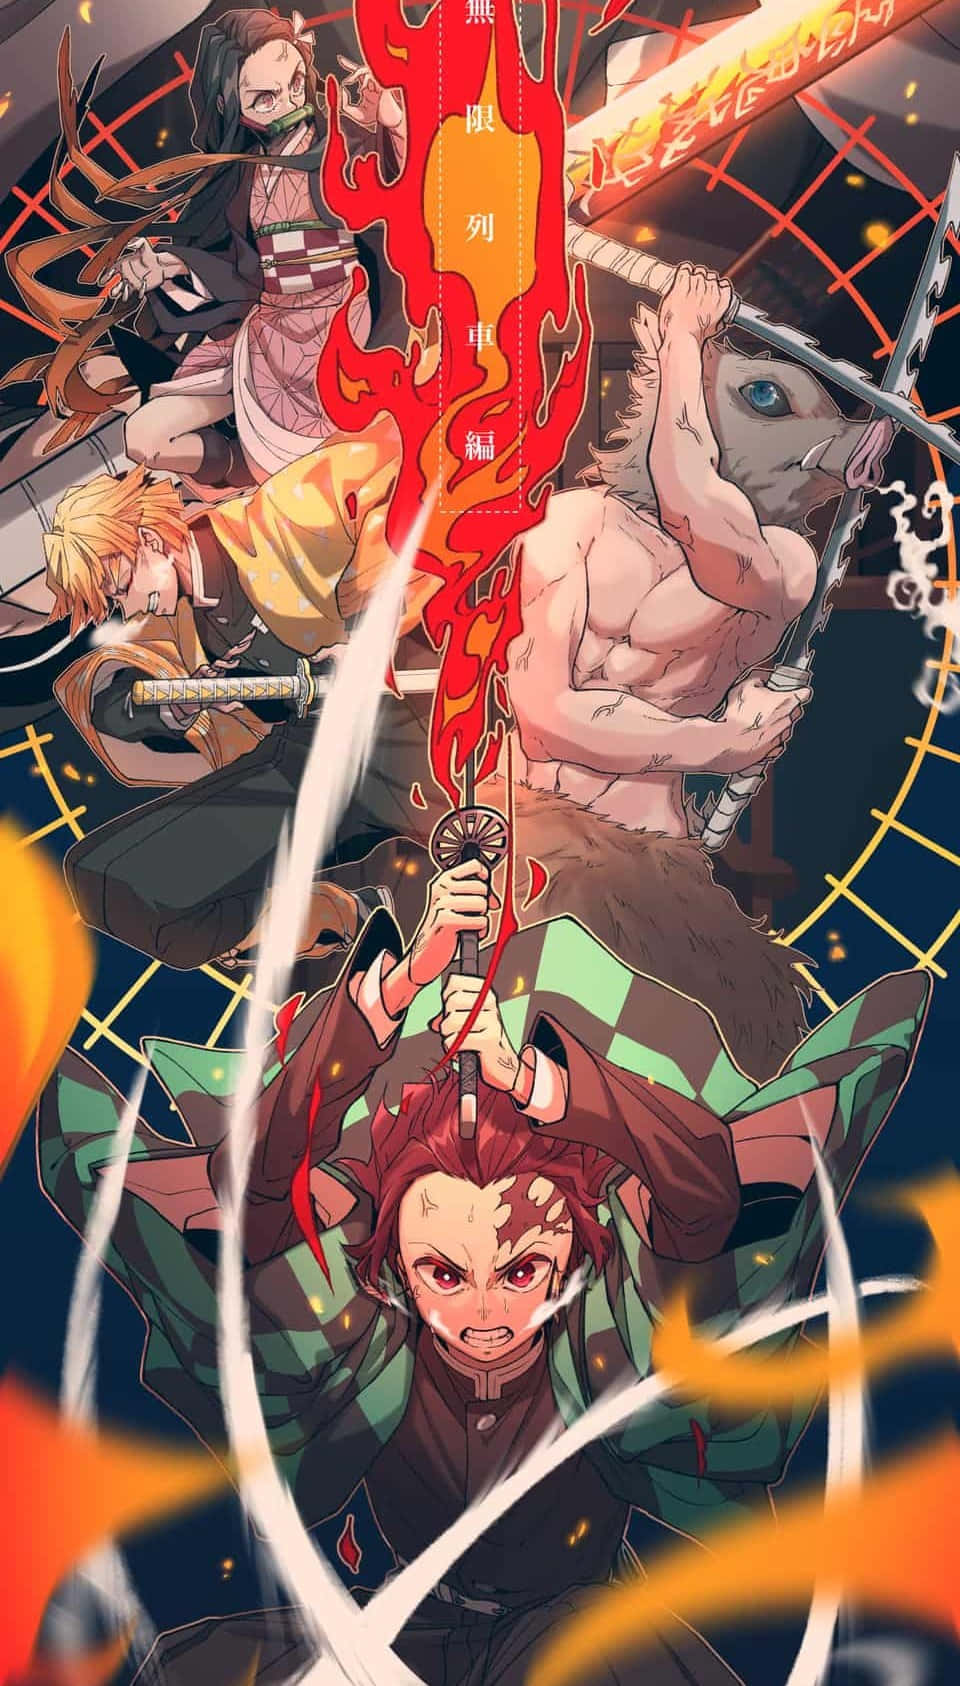 Get Ready for Your Adventure with the Demon Slayer iPhone 11 Wallpaper